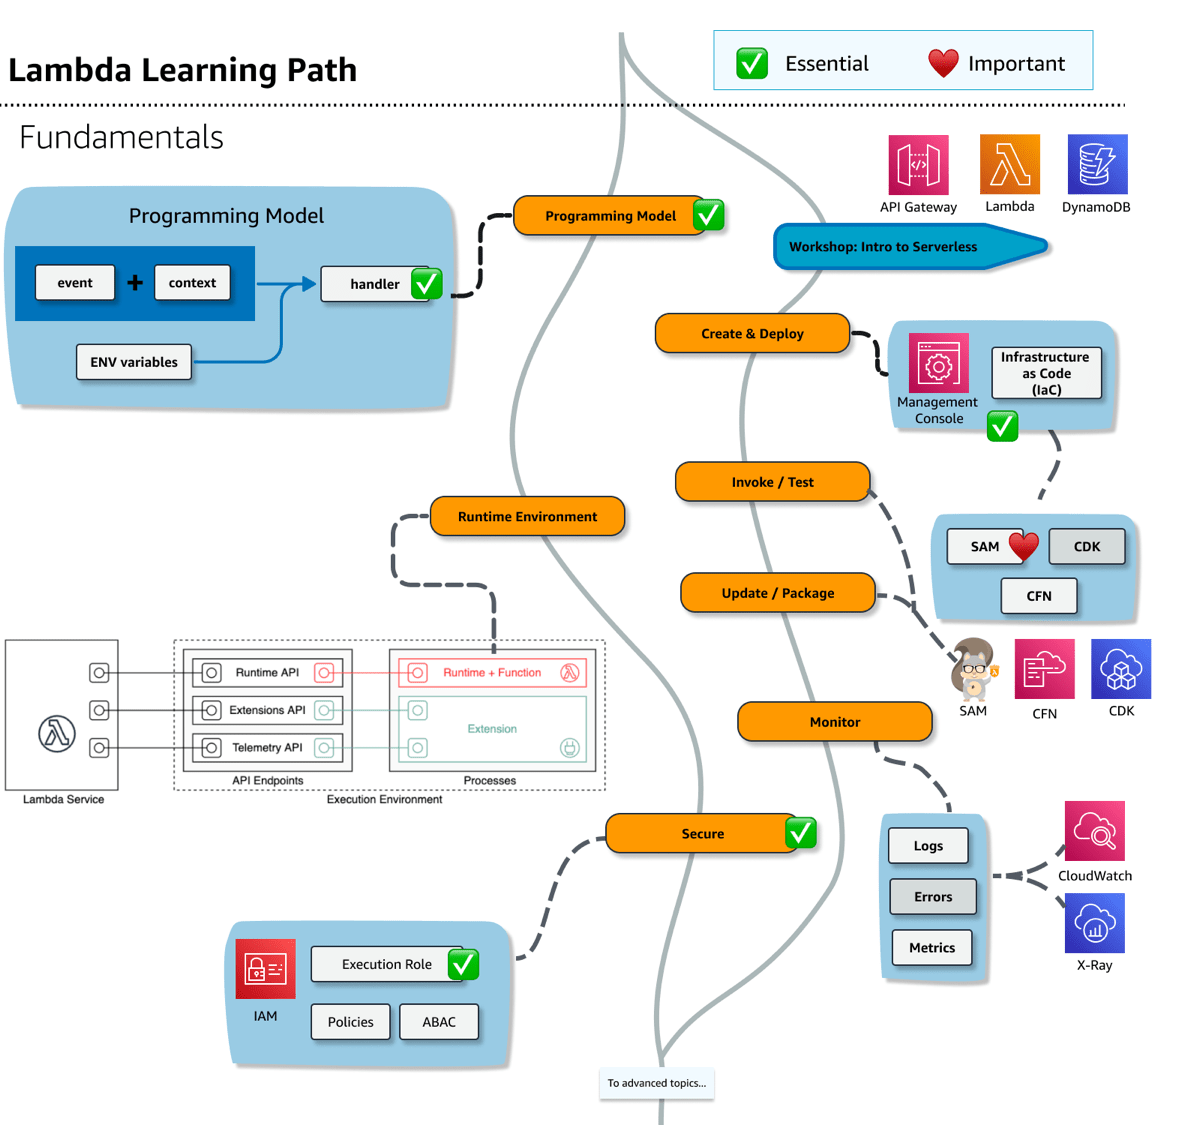 Image of learning path. Described in detail in the following text.